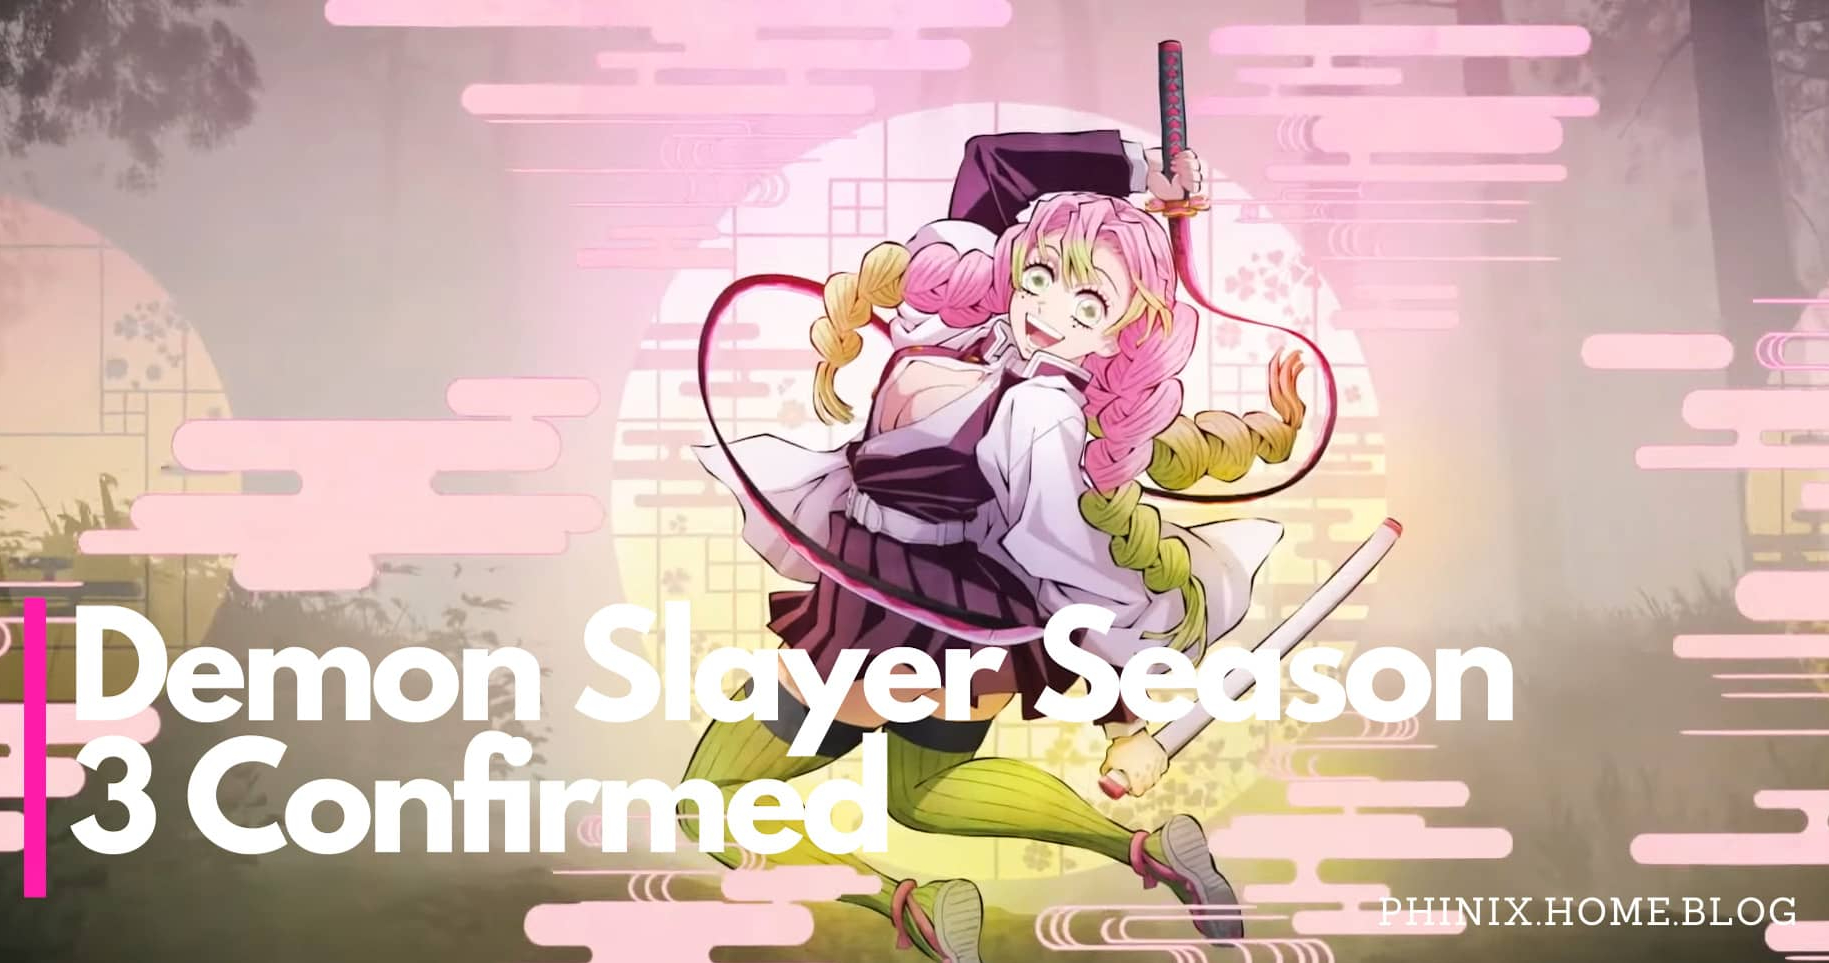 demon slayer season 3 confirmed image from the new teaser happy love hashira